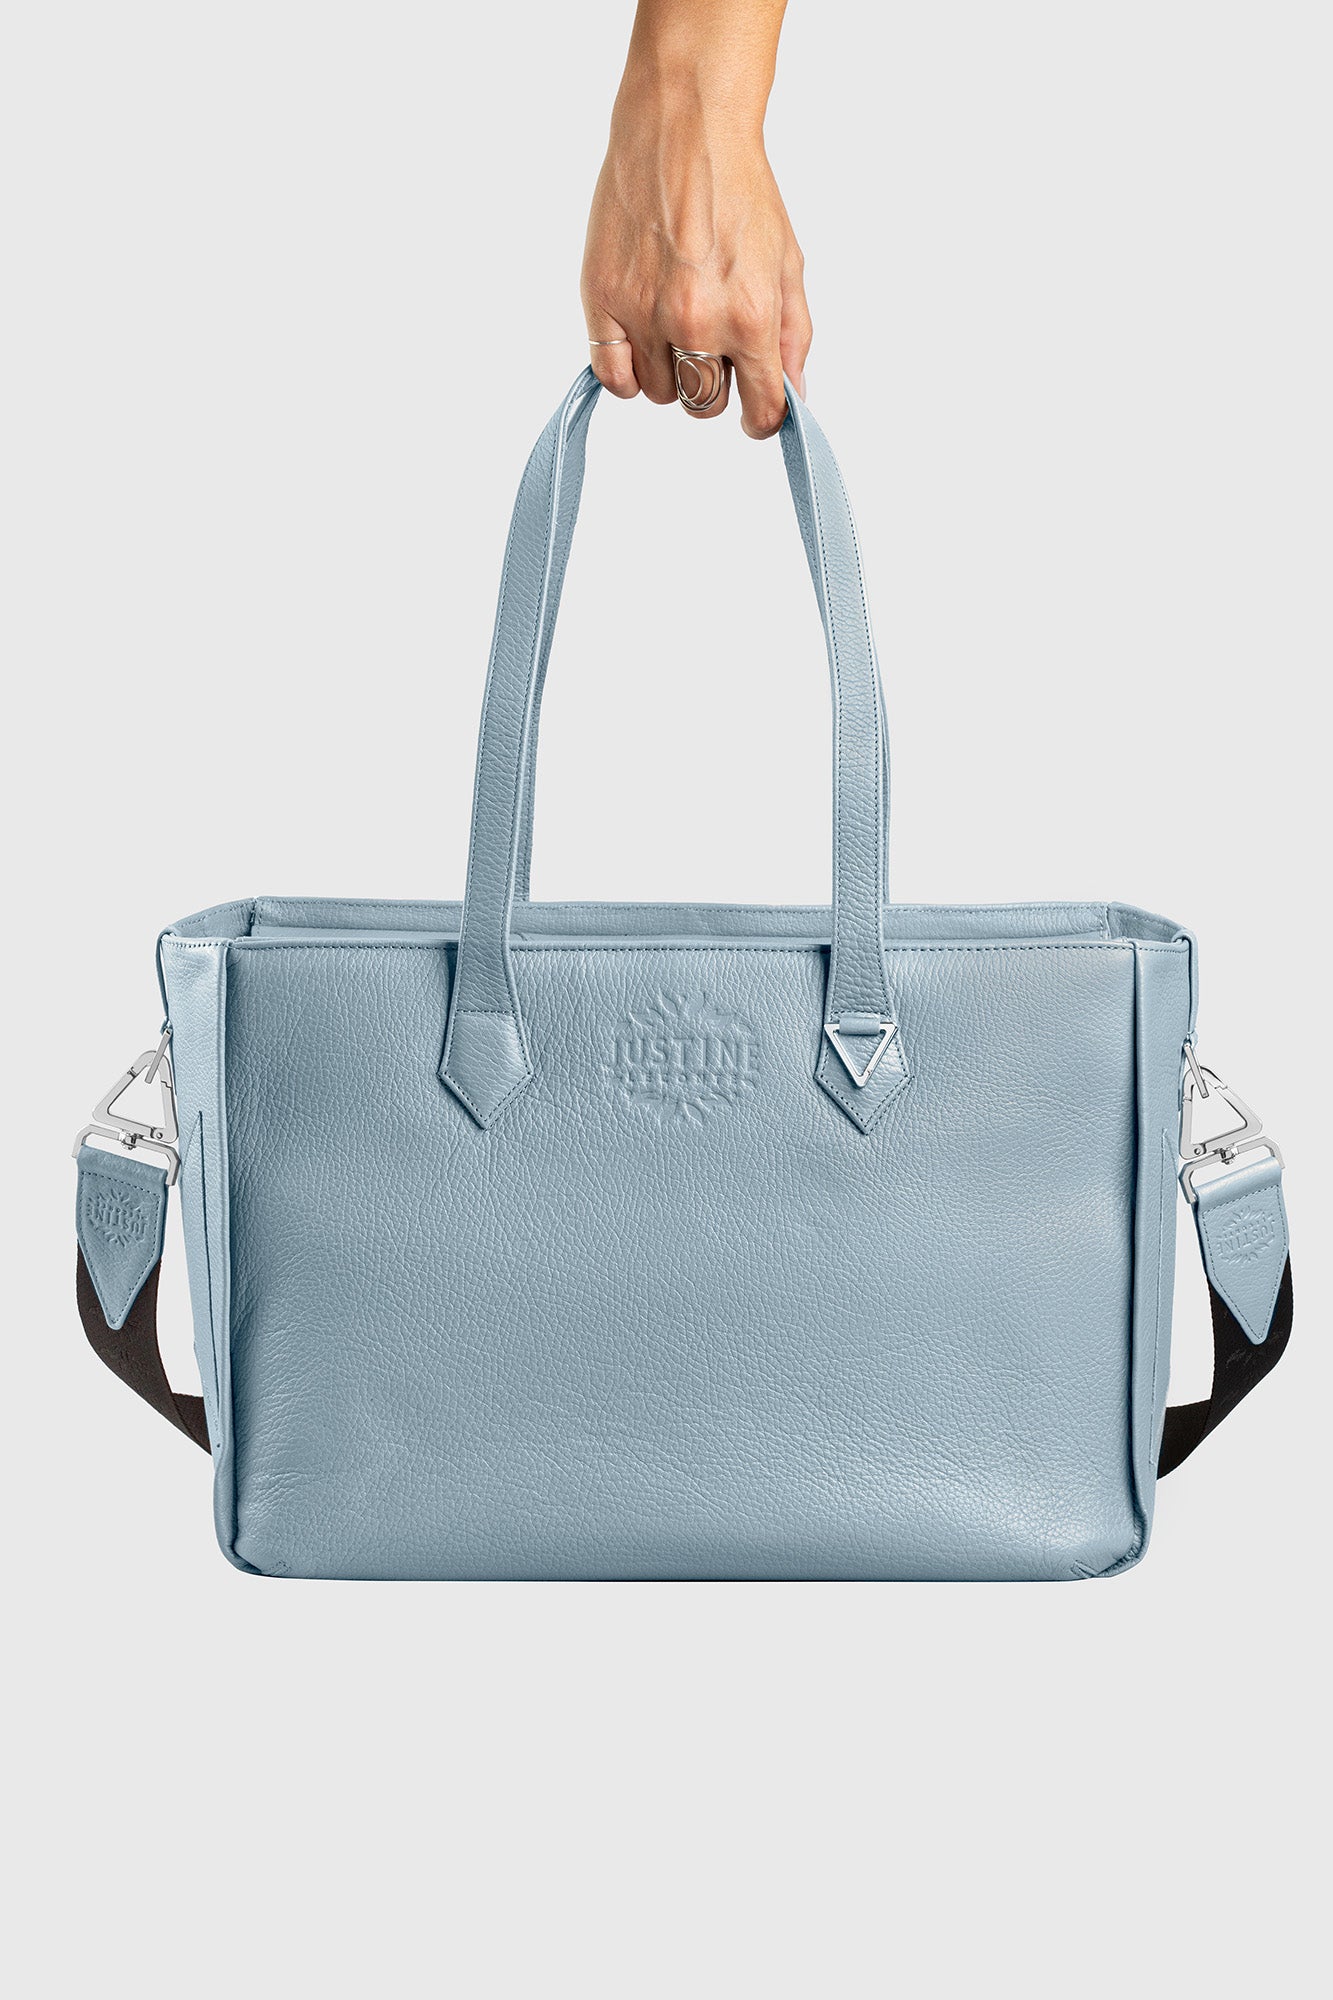 JL tote bag leather - Stone blue